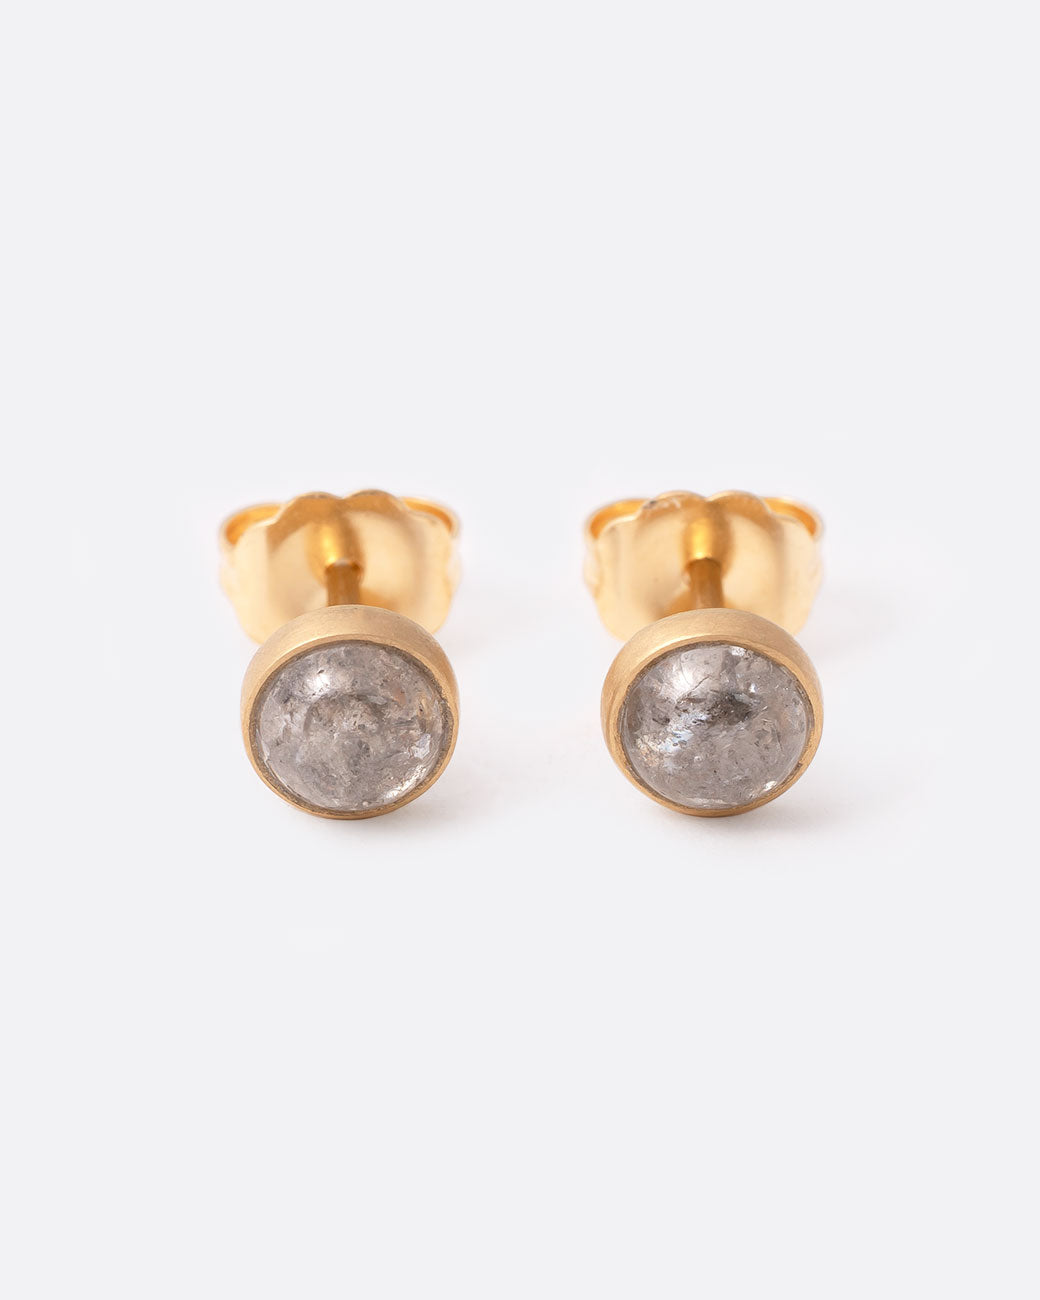 18k yellow gold stud earrings with gray diamond cabochons by Lola Brooks, shown from the front.